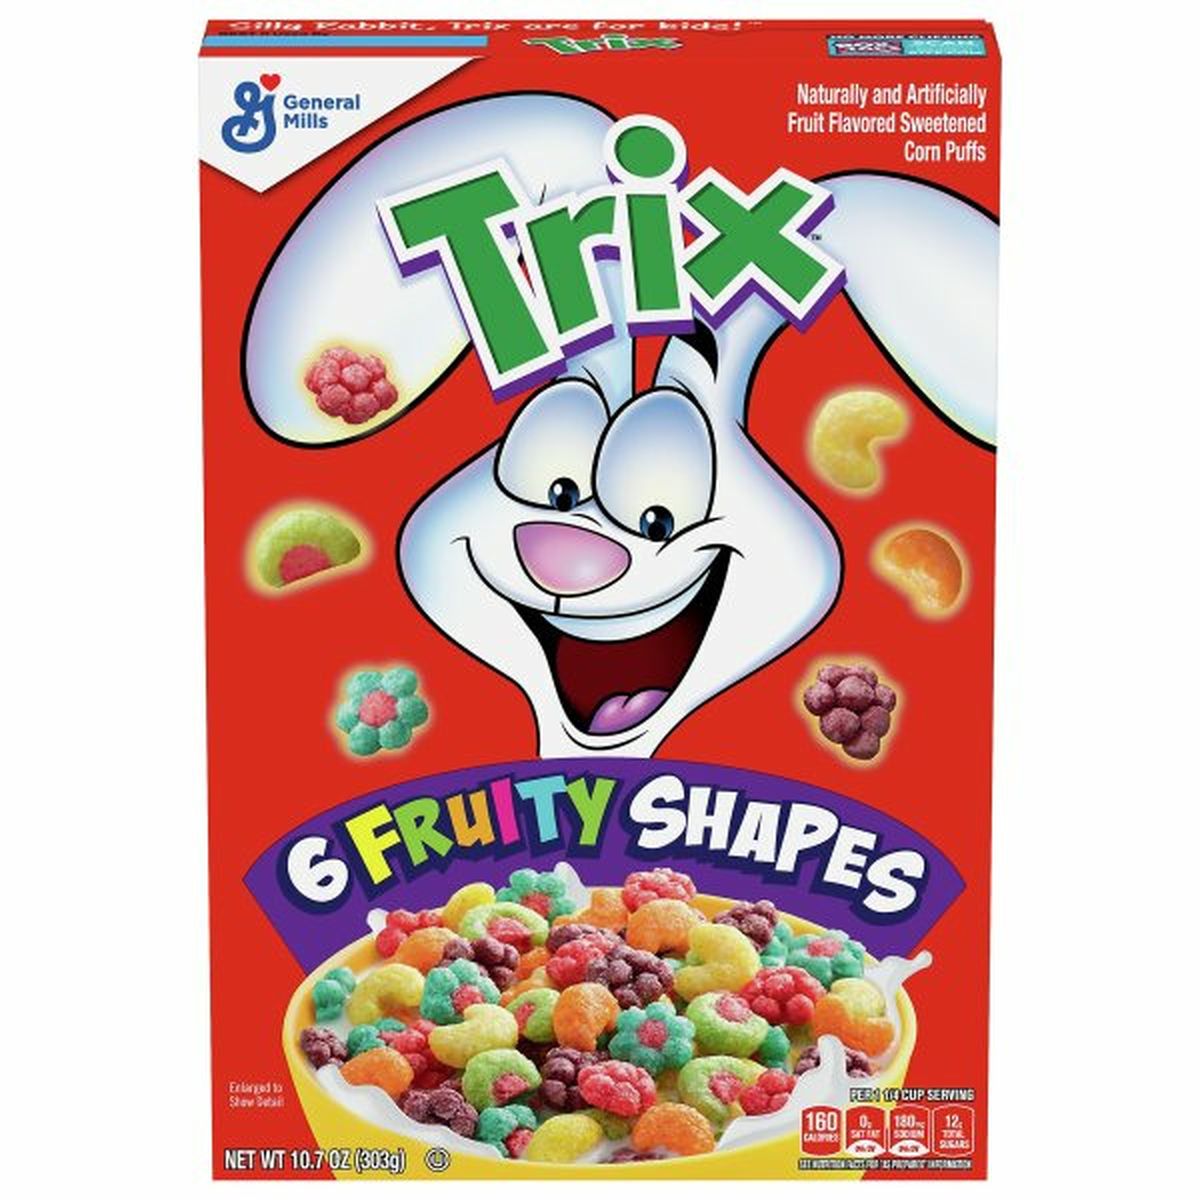 Calories in Trix Sweetened Corn Puffs, Fruit Flavored, 6 Fruity Shapes